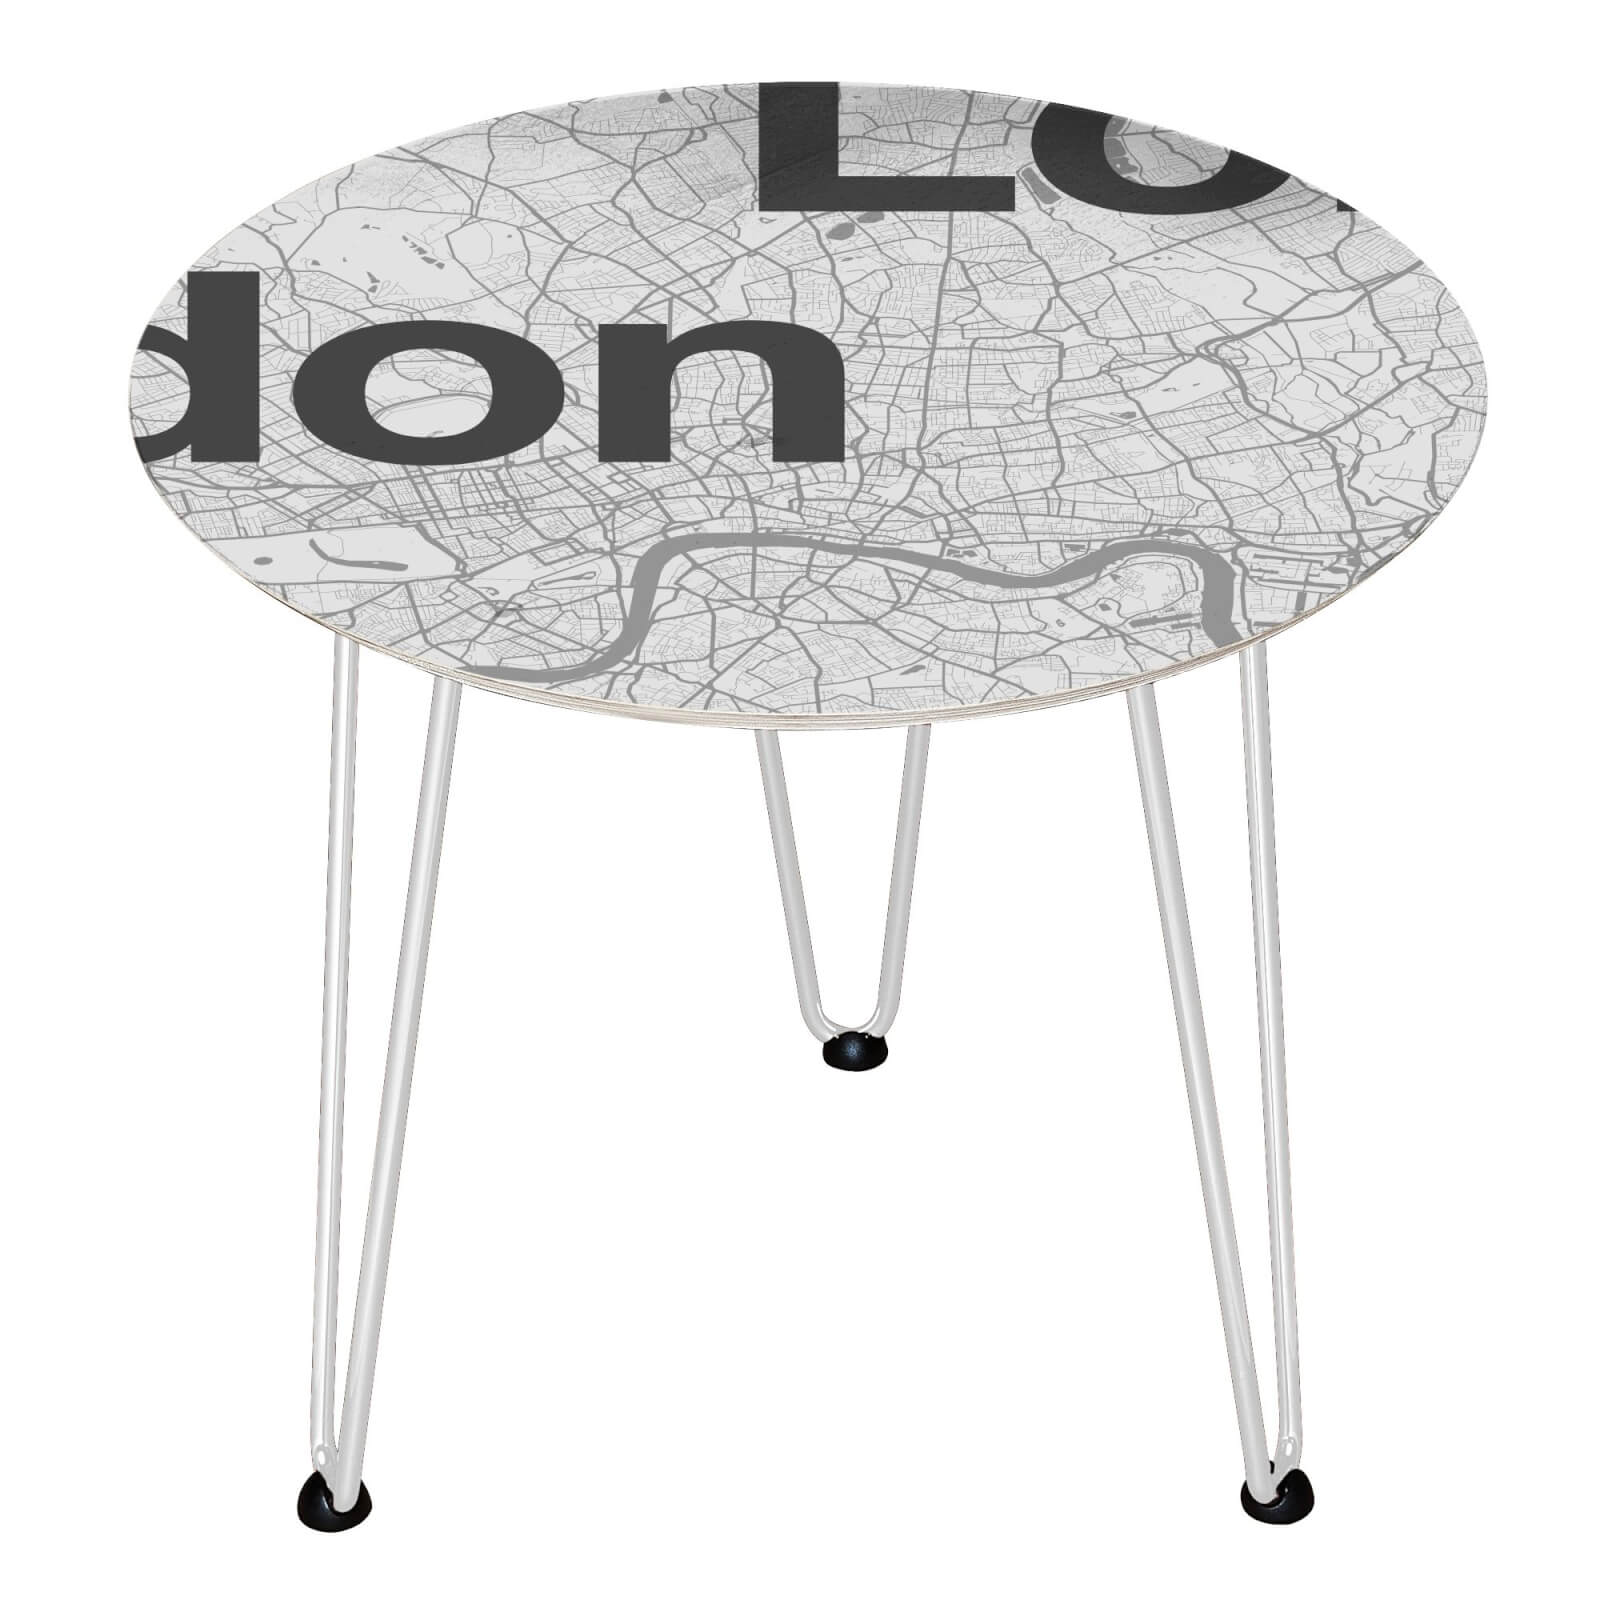 London Minimalist Map Wooden Side Table - White